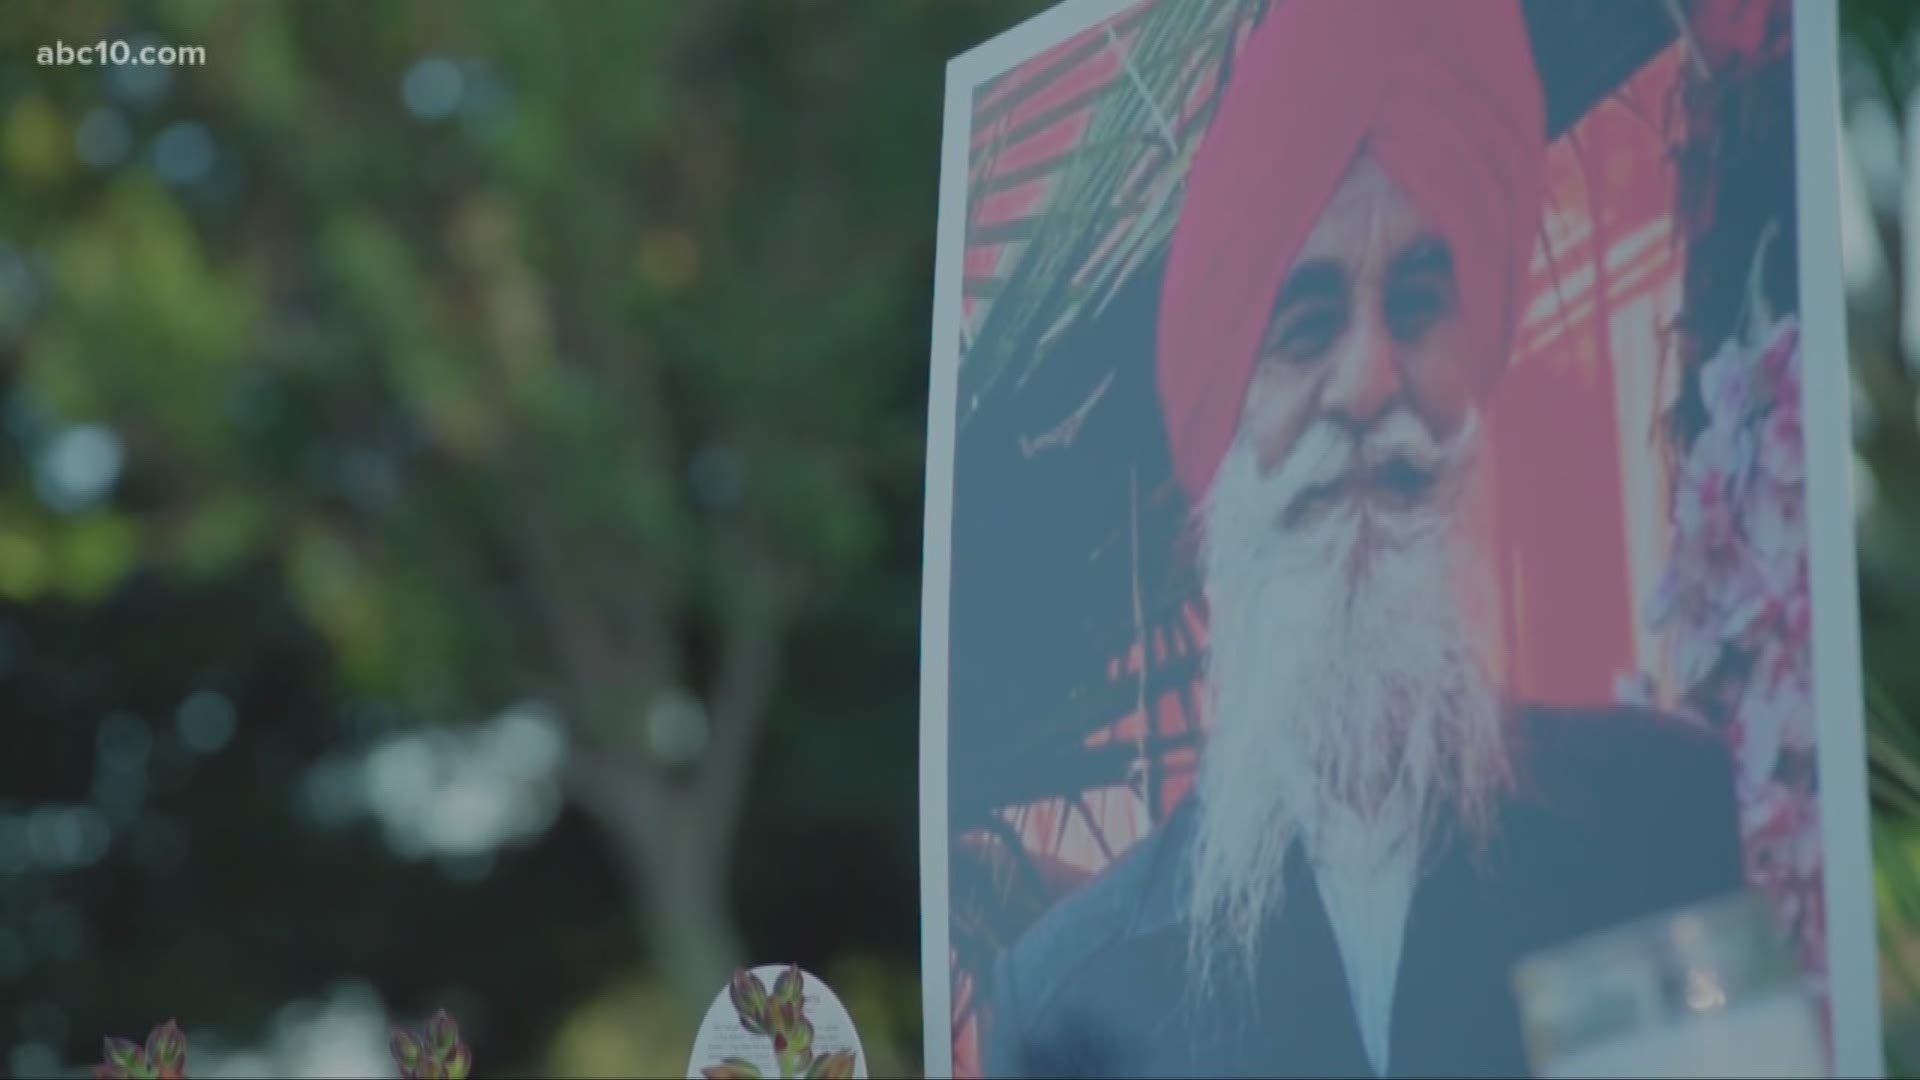 On Wednesday, hundreds of people from the Tracy community attended a vigil for 64-year-old Parmjit Singh at Gretchen Talley Park. It was in that same park that someone attacked Singh on Sunday, fatally stabbing him.